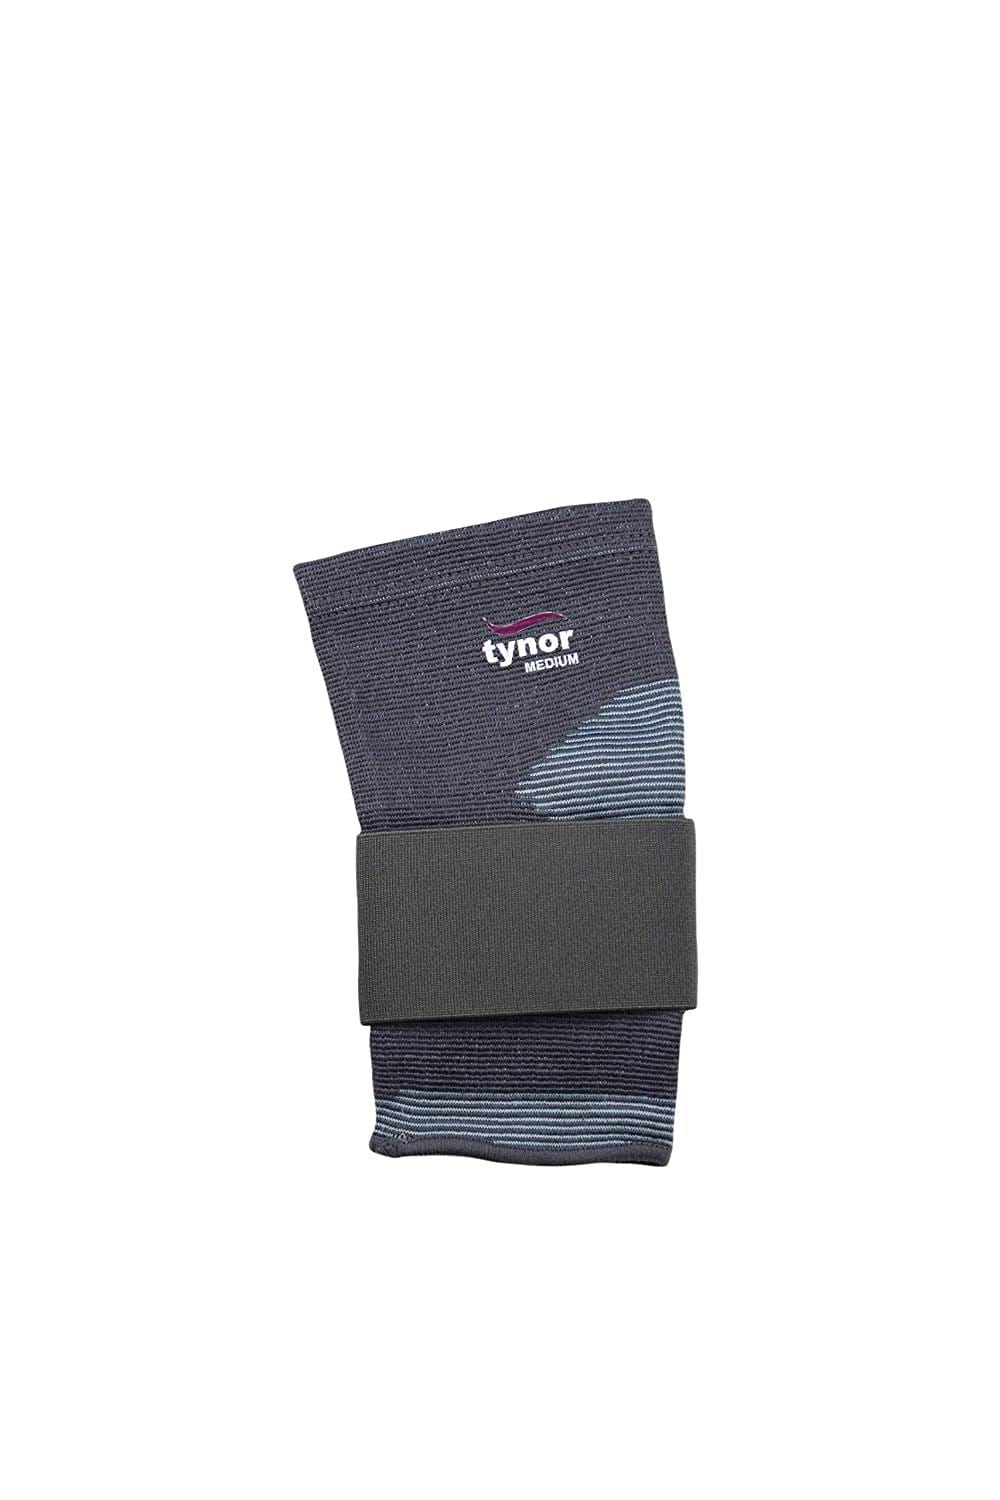 Tynor Elbow Support E-11-Health & Personal Care-dealsplant